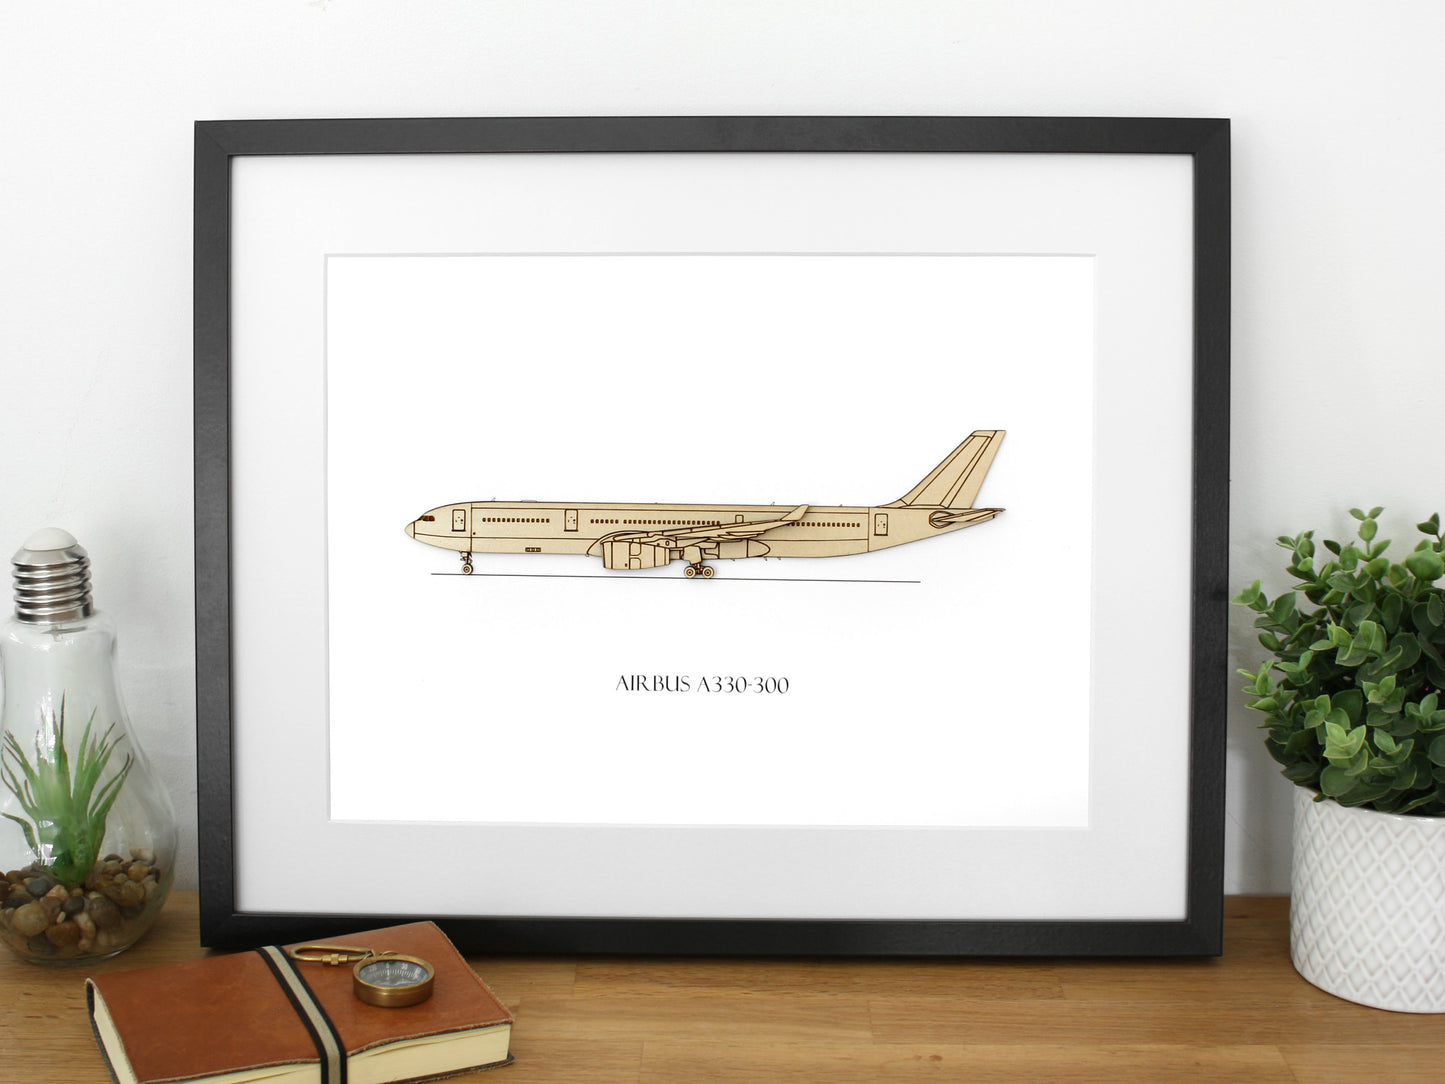 Airbus A330-300 aviation gifts